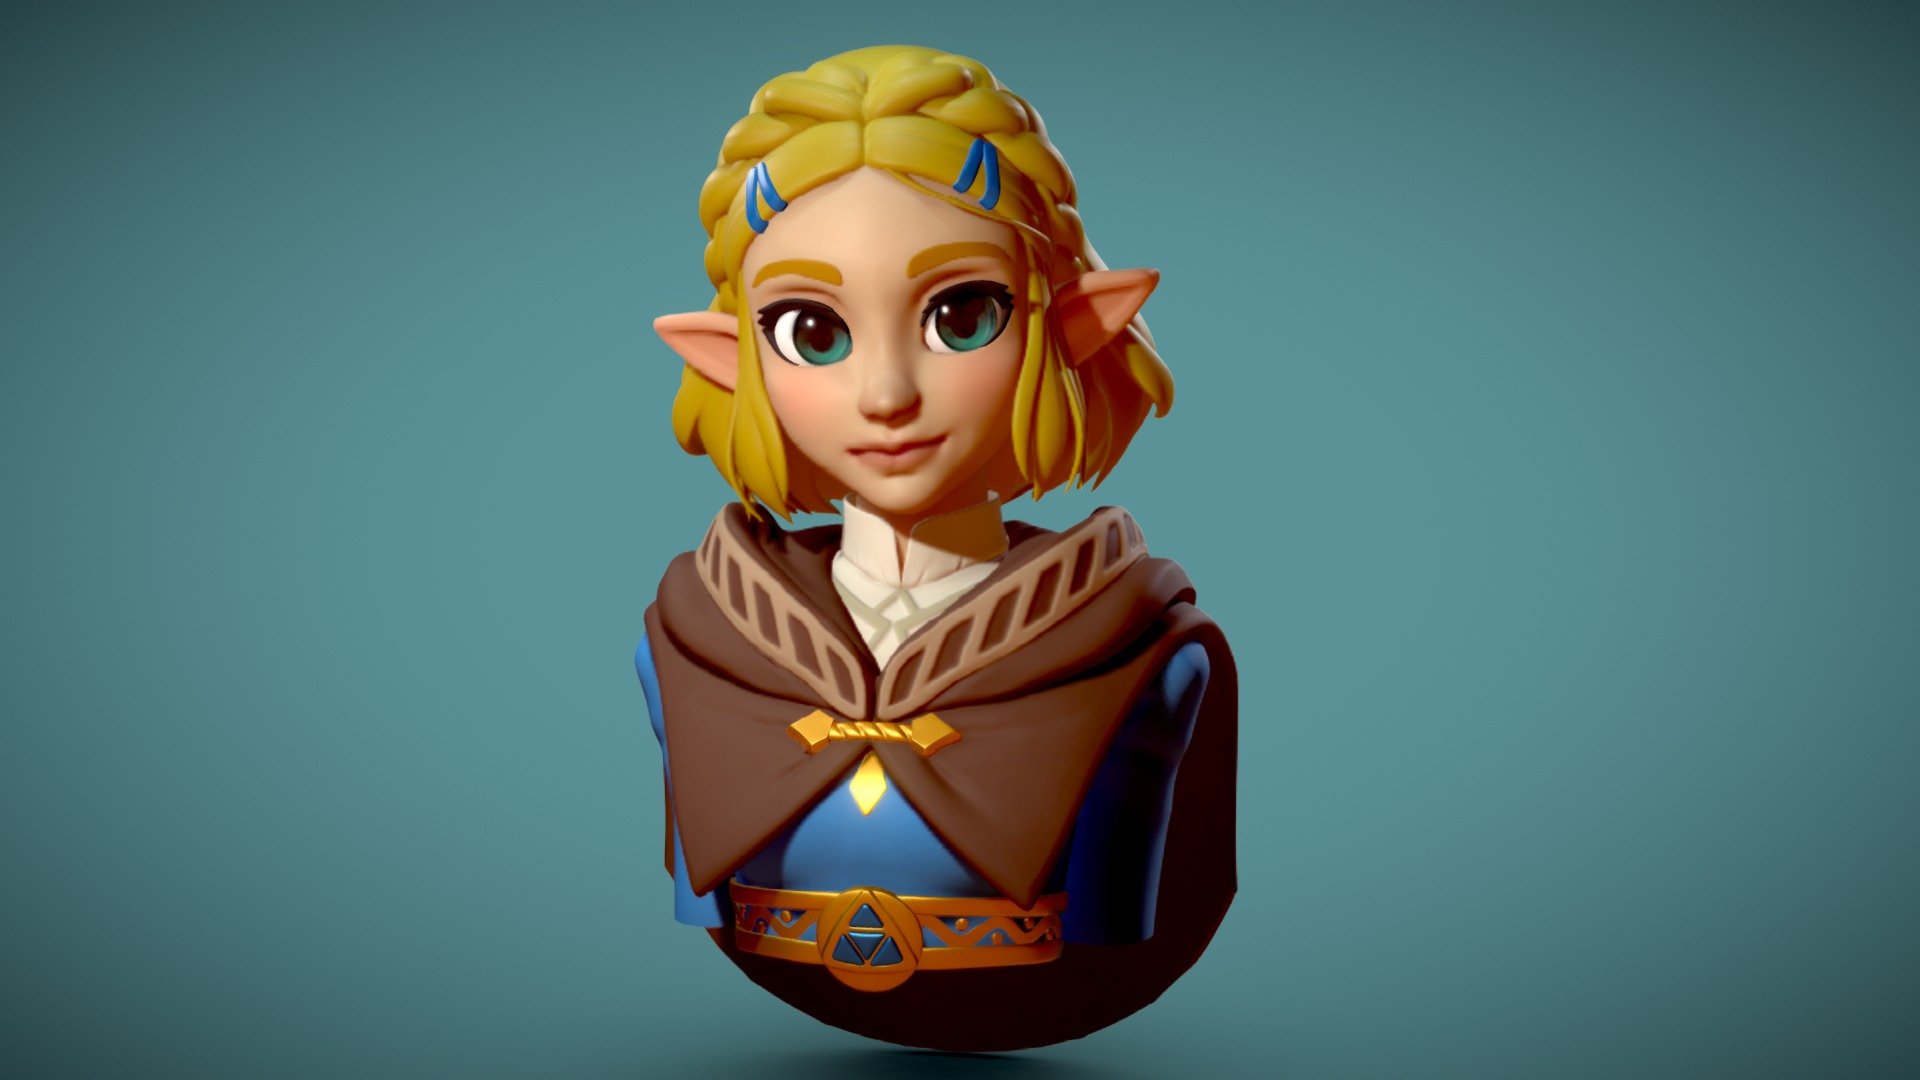 I wanted to do a quick fanart of Zelda from the BoTW 2 announcement trailer. I thought her new hair style was really cute, but I didn't want to spend too much time on a full game-res fanart so I spent the evening of the announcement trailer busting this out. 
Sculpted in zbrush with minor polypaint 3d model